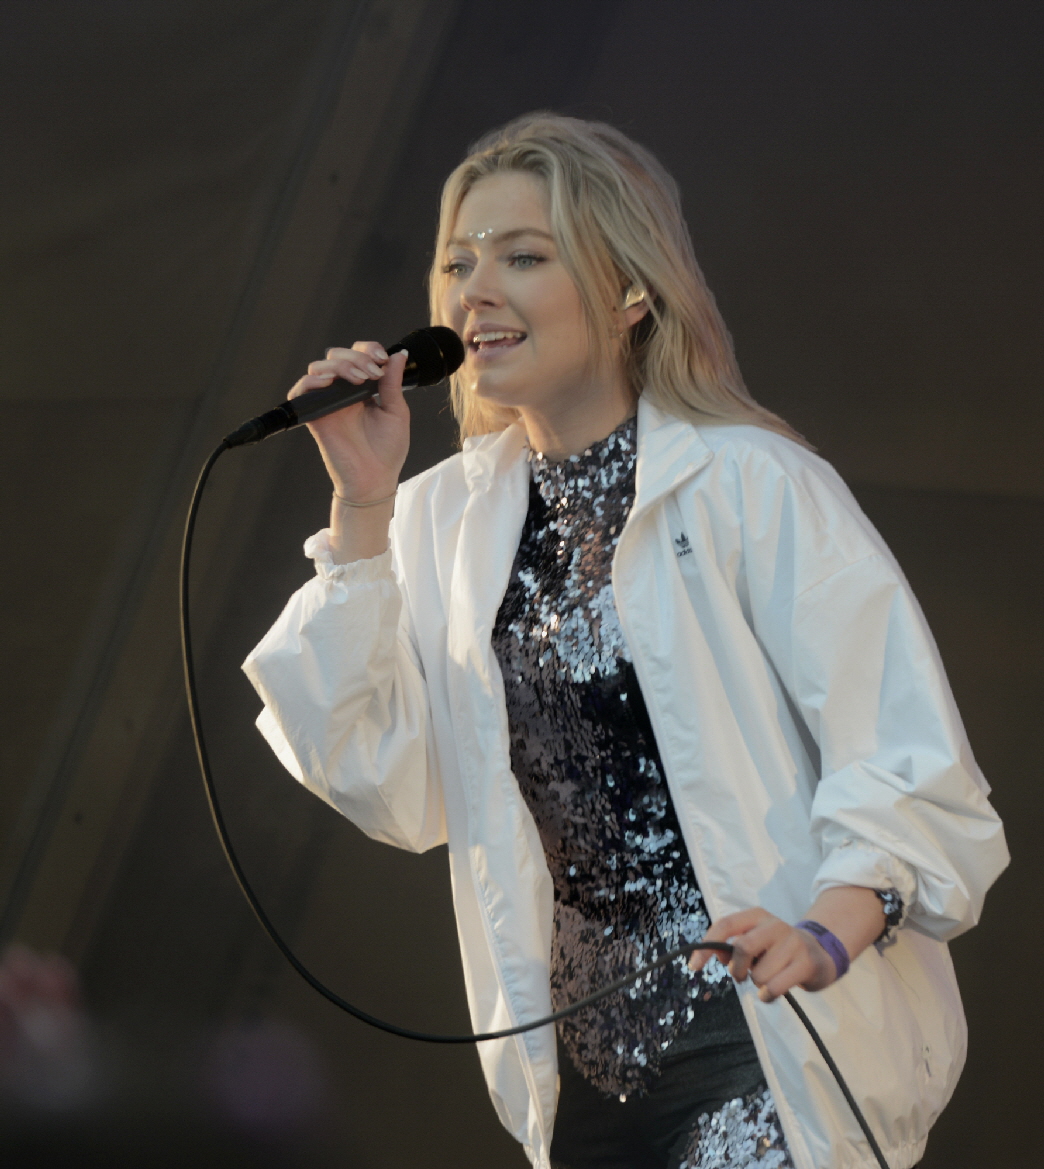 On Thursday evening the festival begins, with three stages where performances are paced so all  can enjoy the music, One of the first acts to perform was Astrid S who energized the audience.  Even the artists join in listening to other performers after their sets are completed.